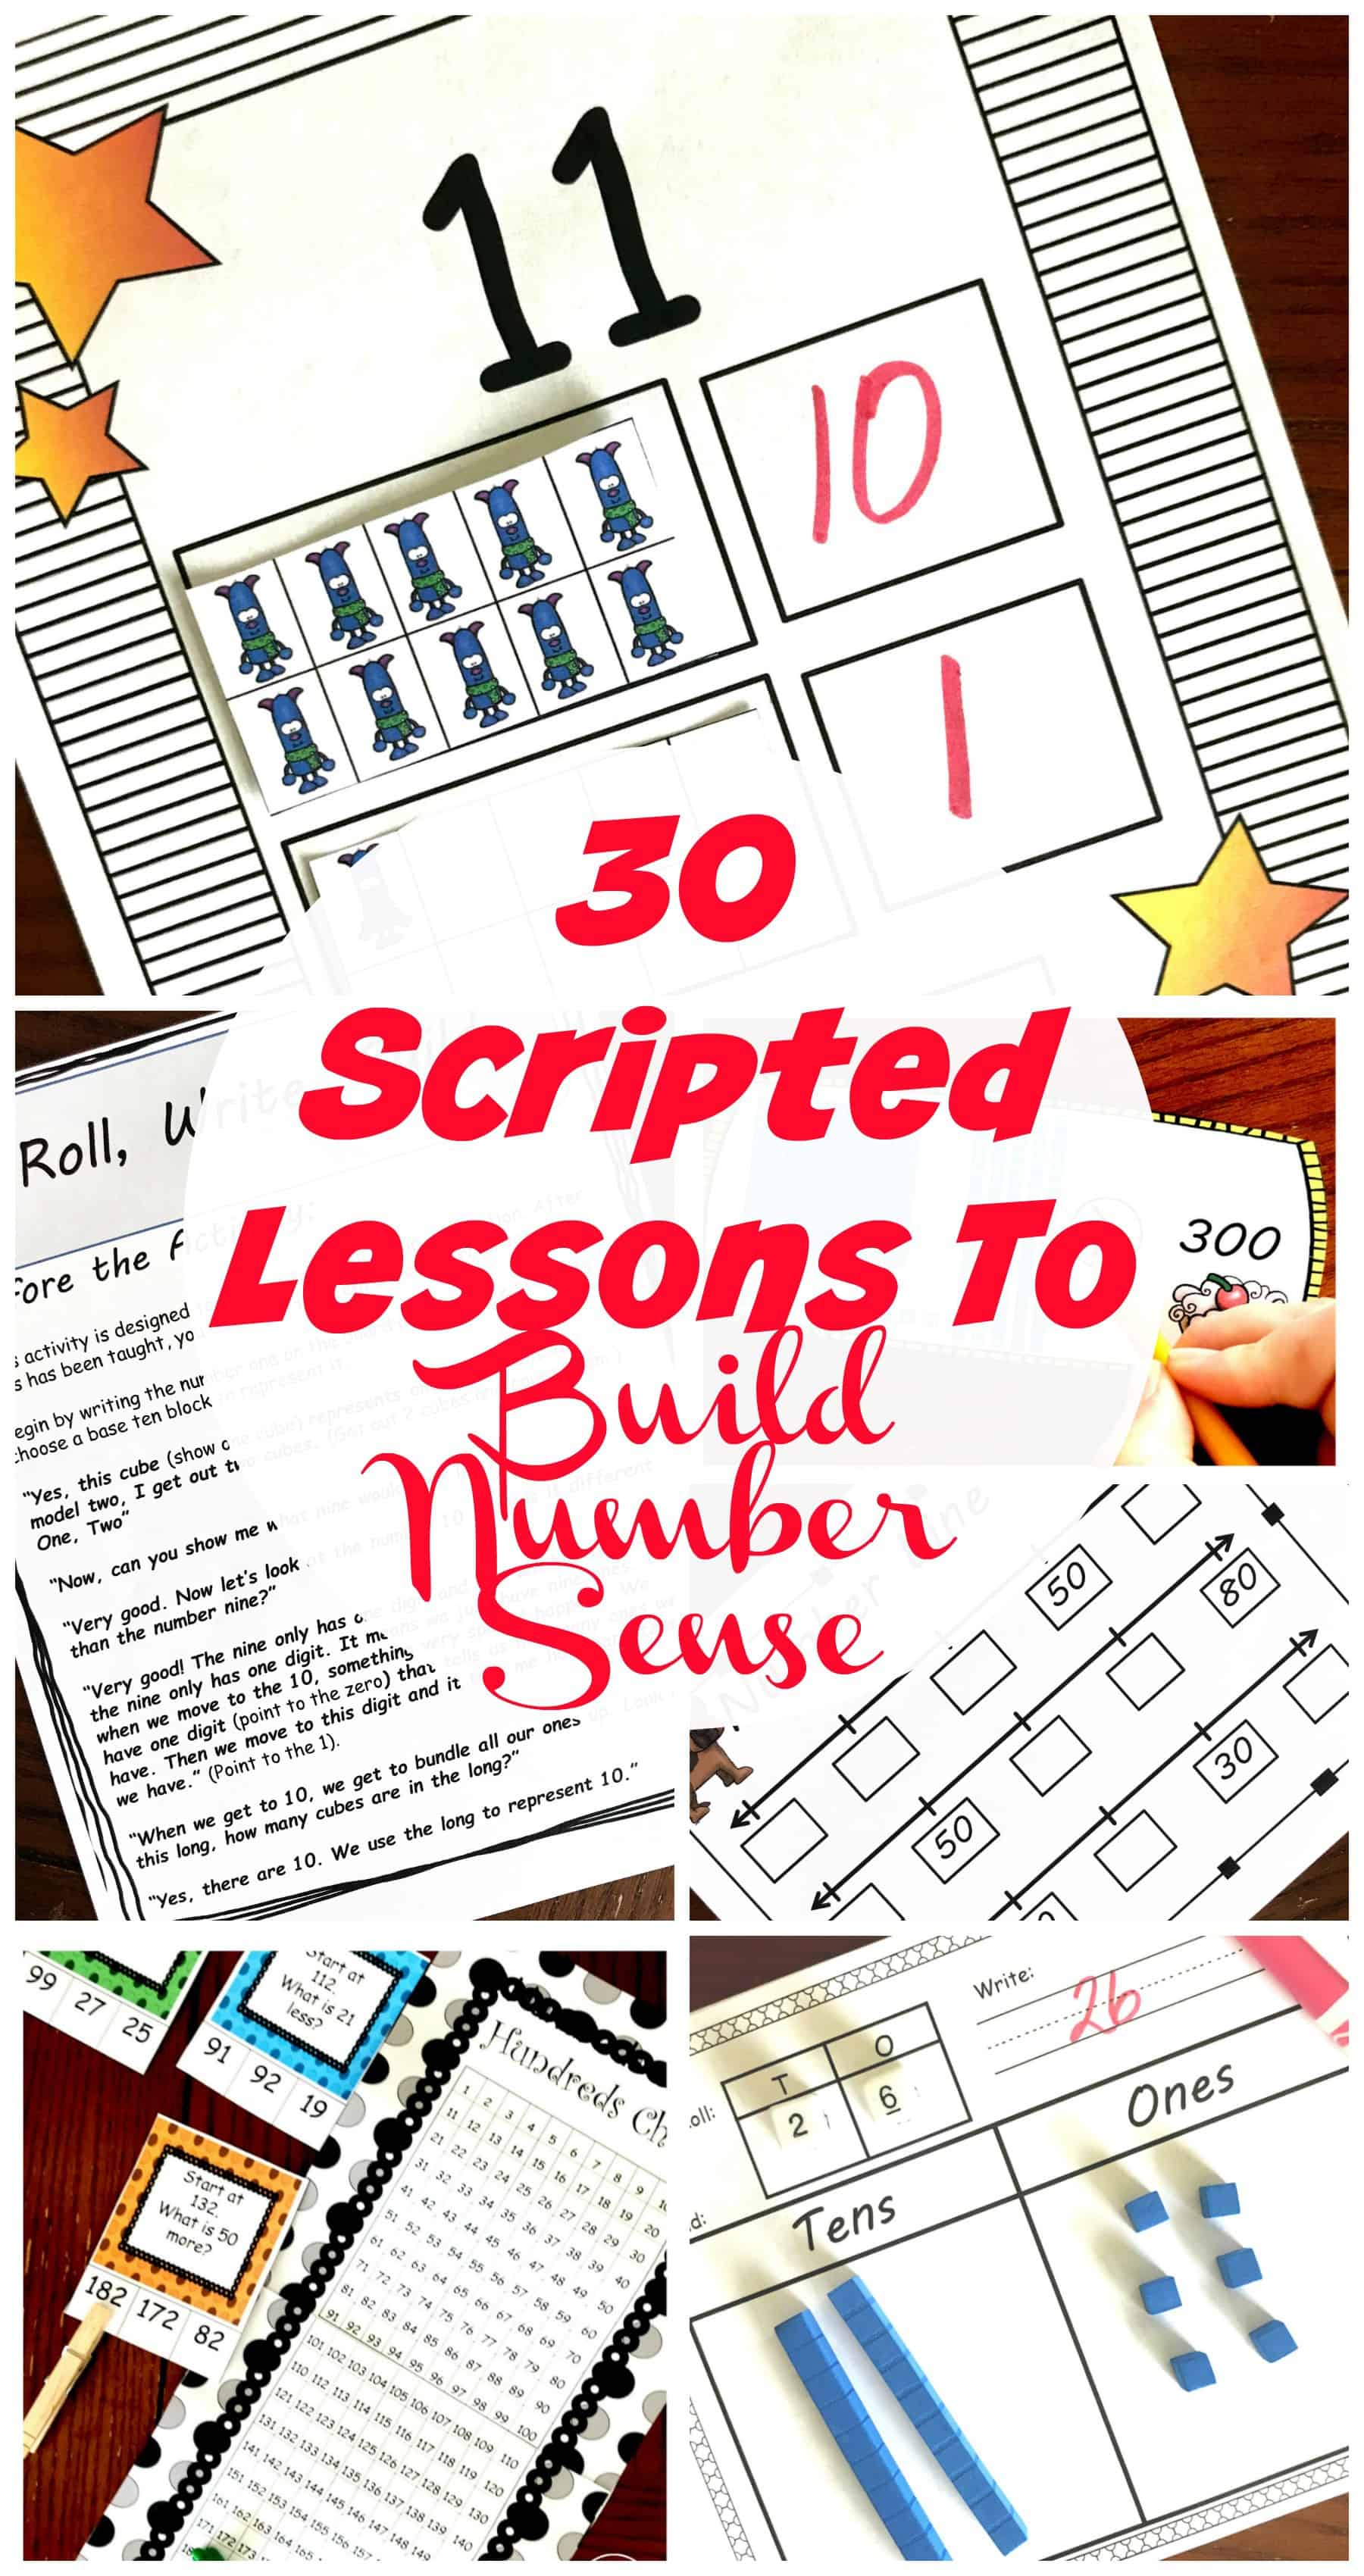 Grab these 30 Scripted Lessons for Developing Number Sense in Kindergarten, First, and Second Grade. The lessons are fun and hands-on to make learning fun for your little ones, but at the same time helping them learn valuable skills. They will explore the hundreds chart, base ten blocks, and number line. Then they get to work on decomposing!